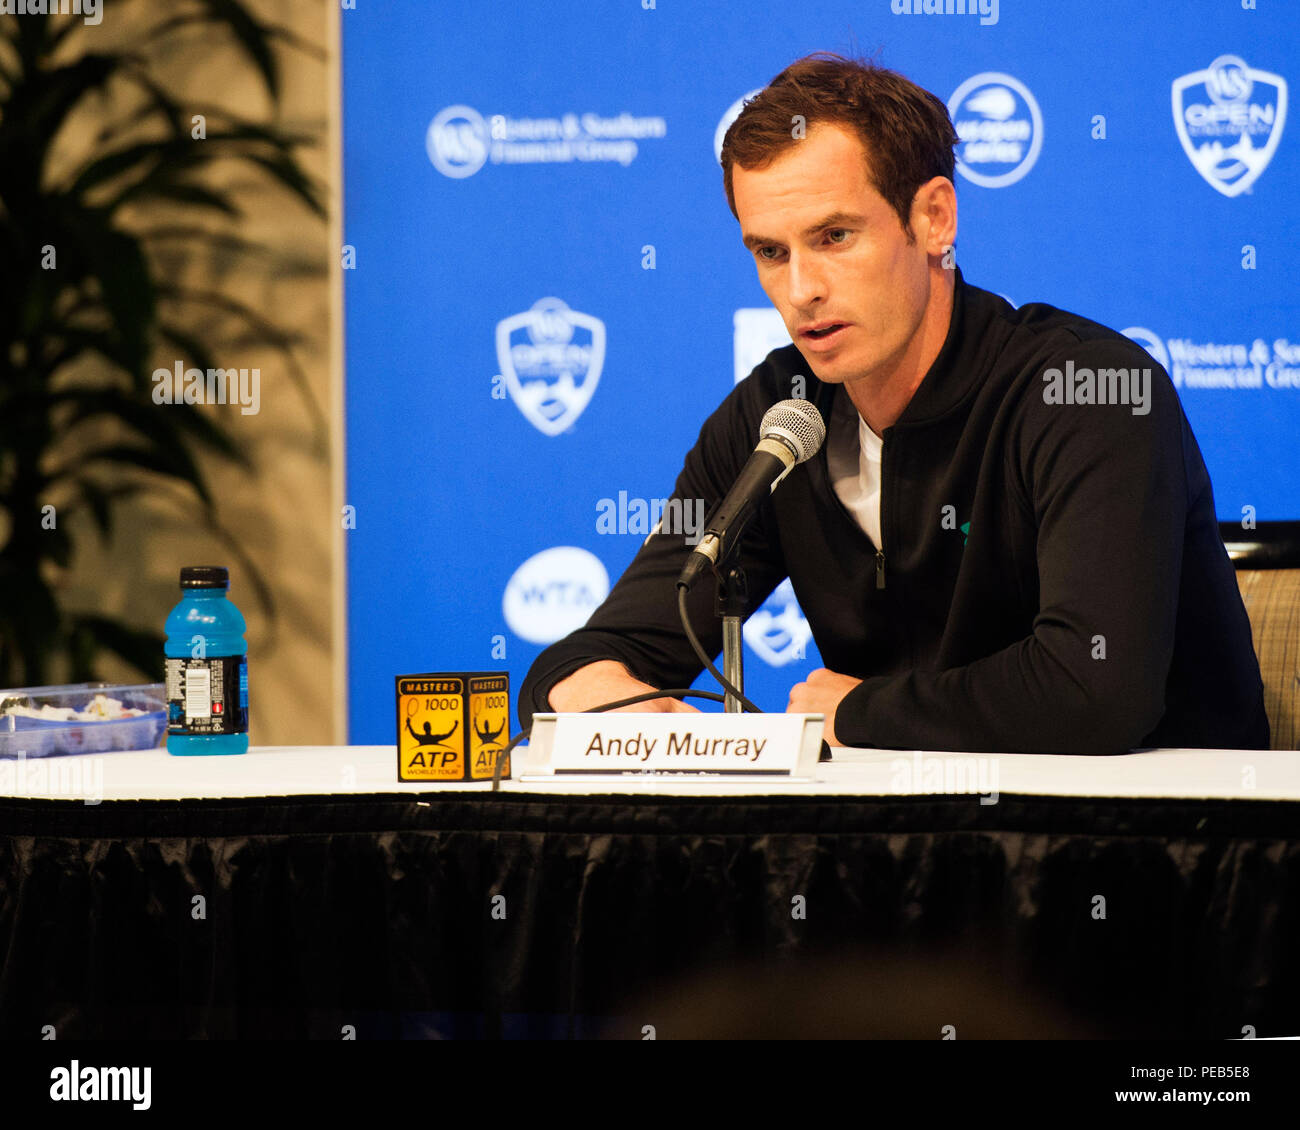 Mason, Ohio, USA. August 13, 2018: Andy Murray (GBR) addresses the press after his loss to Lucas Pouille (FRA) at the Western Southern Open in Brent Clark/Alamy Live News Stock Photo